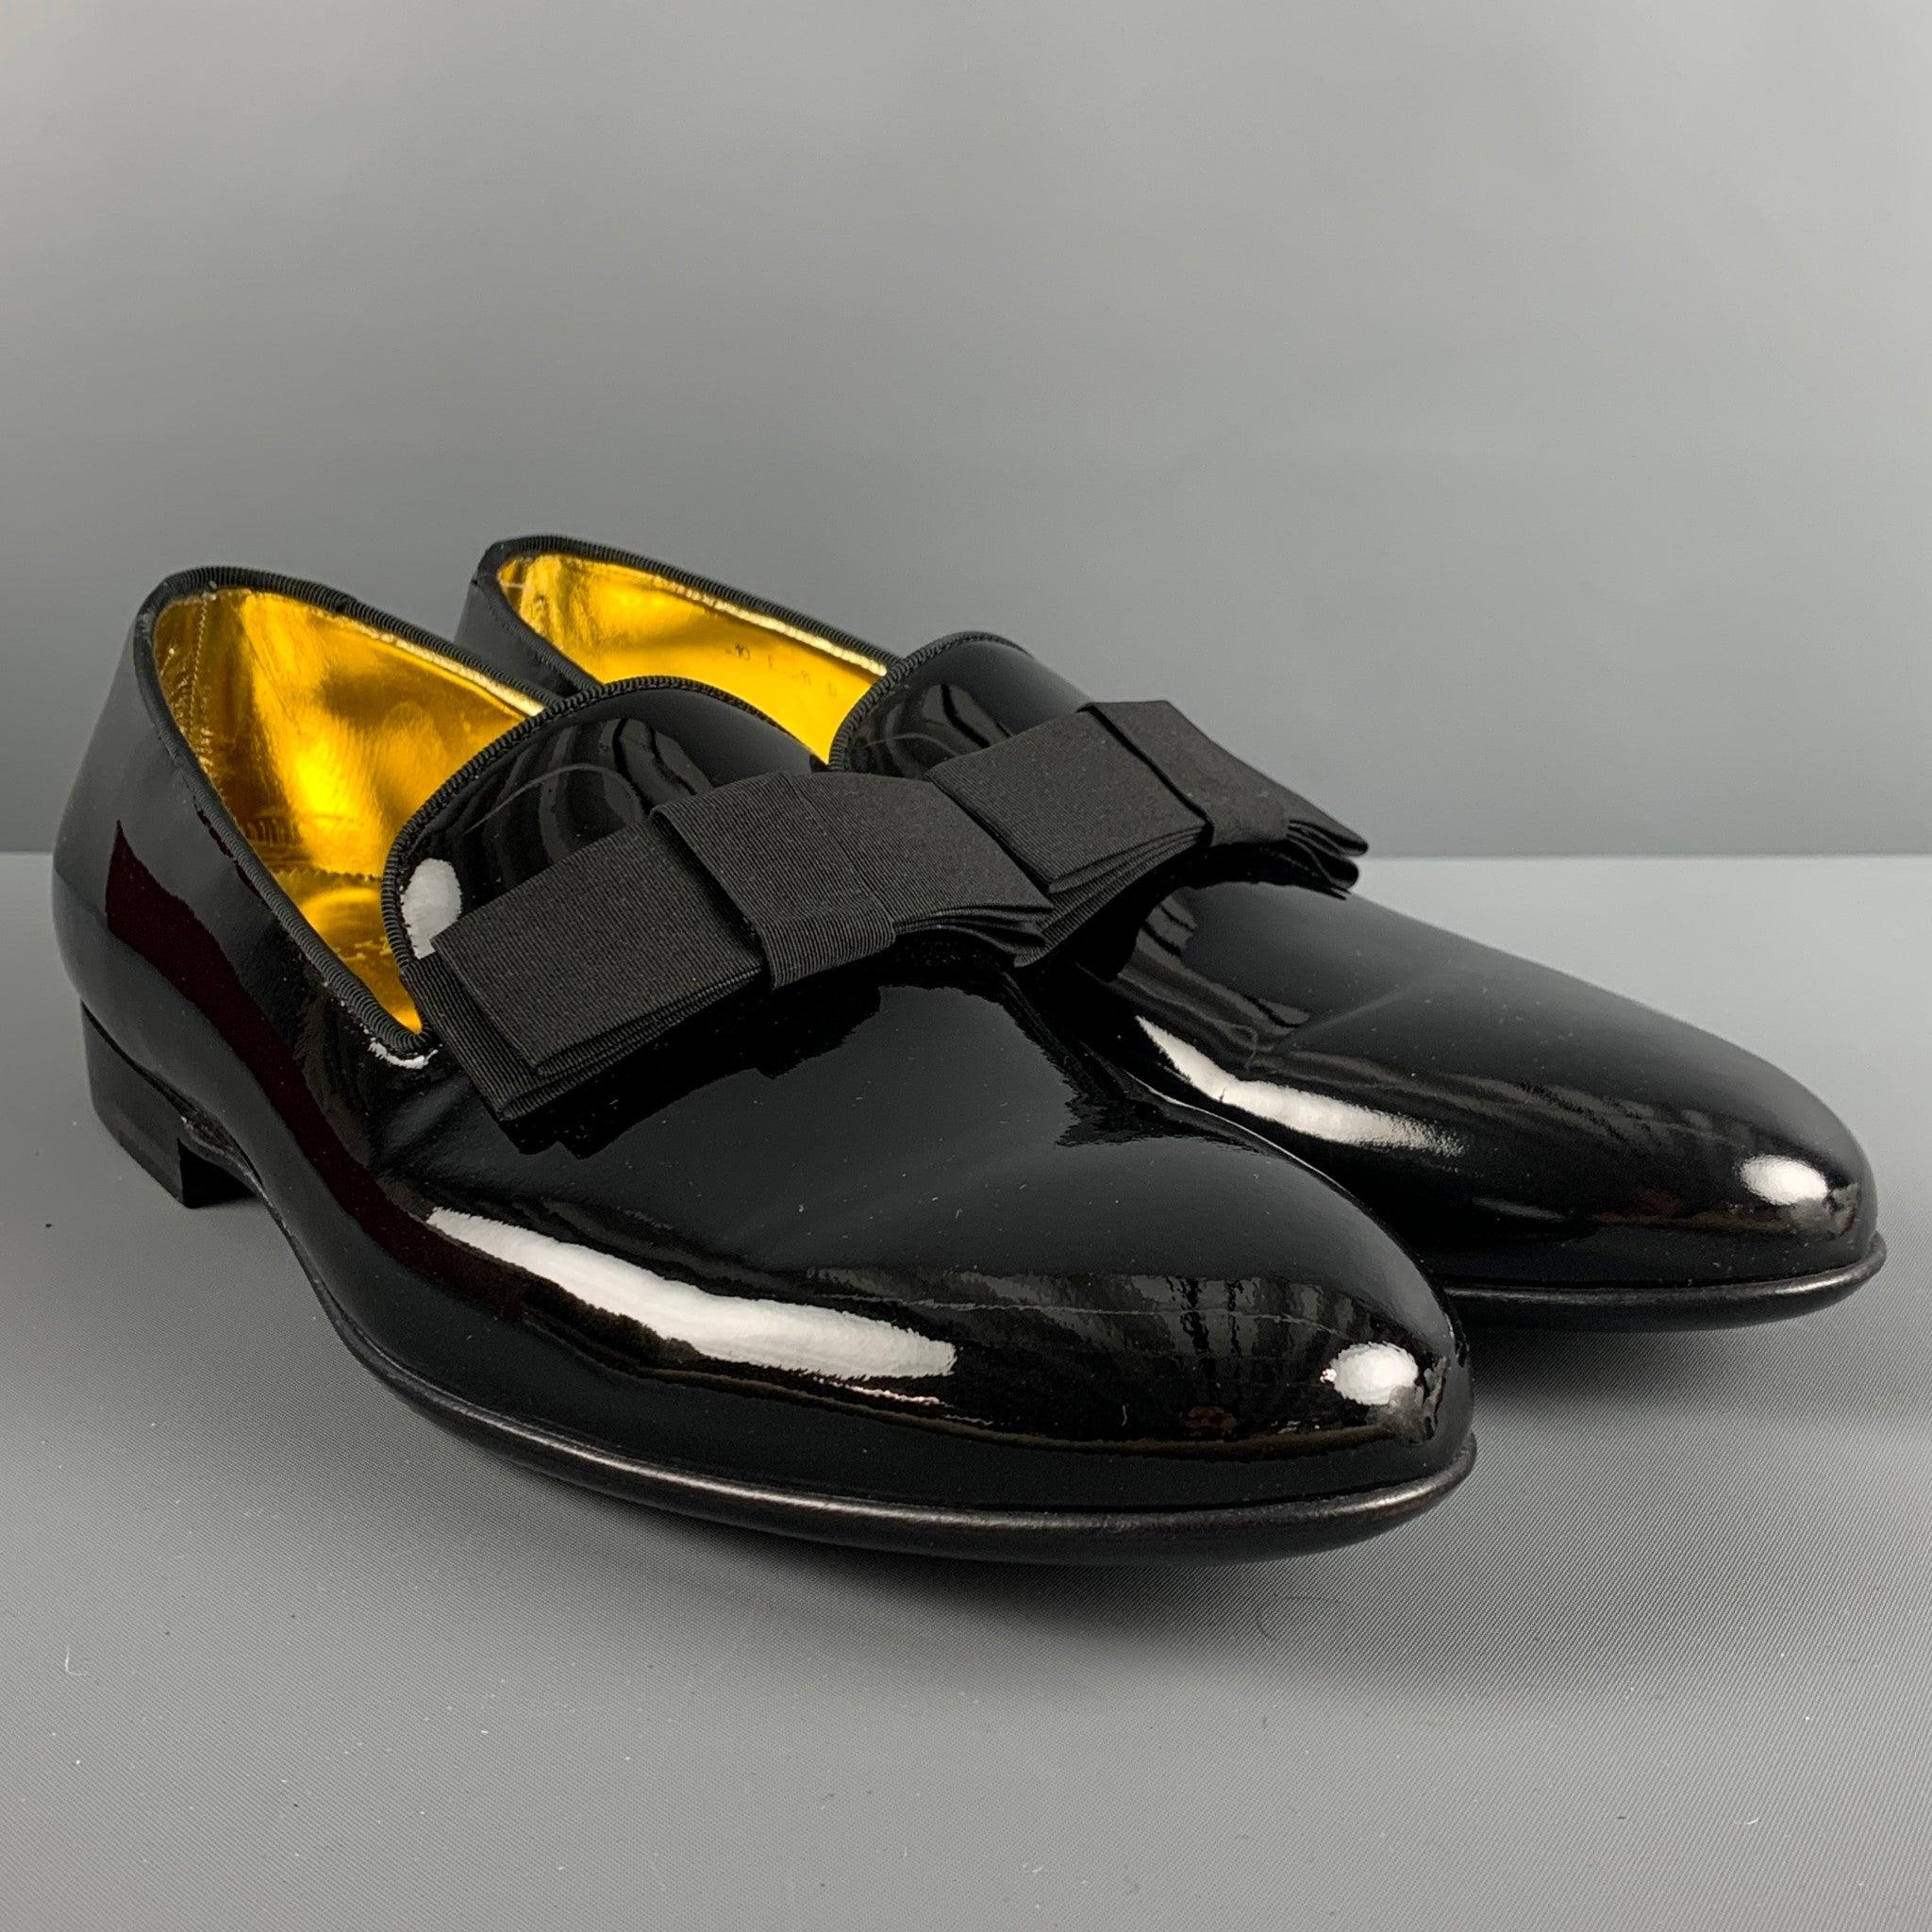 BALLY dress loafers come in black patent leather and a bowtie detail. Made in Switzerland.
Comes with Box, and Dust Bag.New with Tags. 

Marked:   487601 11NAOJ EU10/ USA 11Outsole: 12.5 x 4 inches 
  
  
 
Reference: 125618
Category: Loafers
More